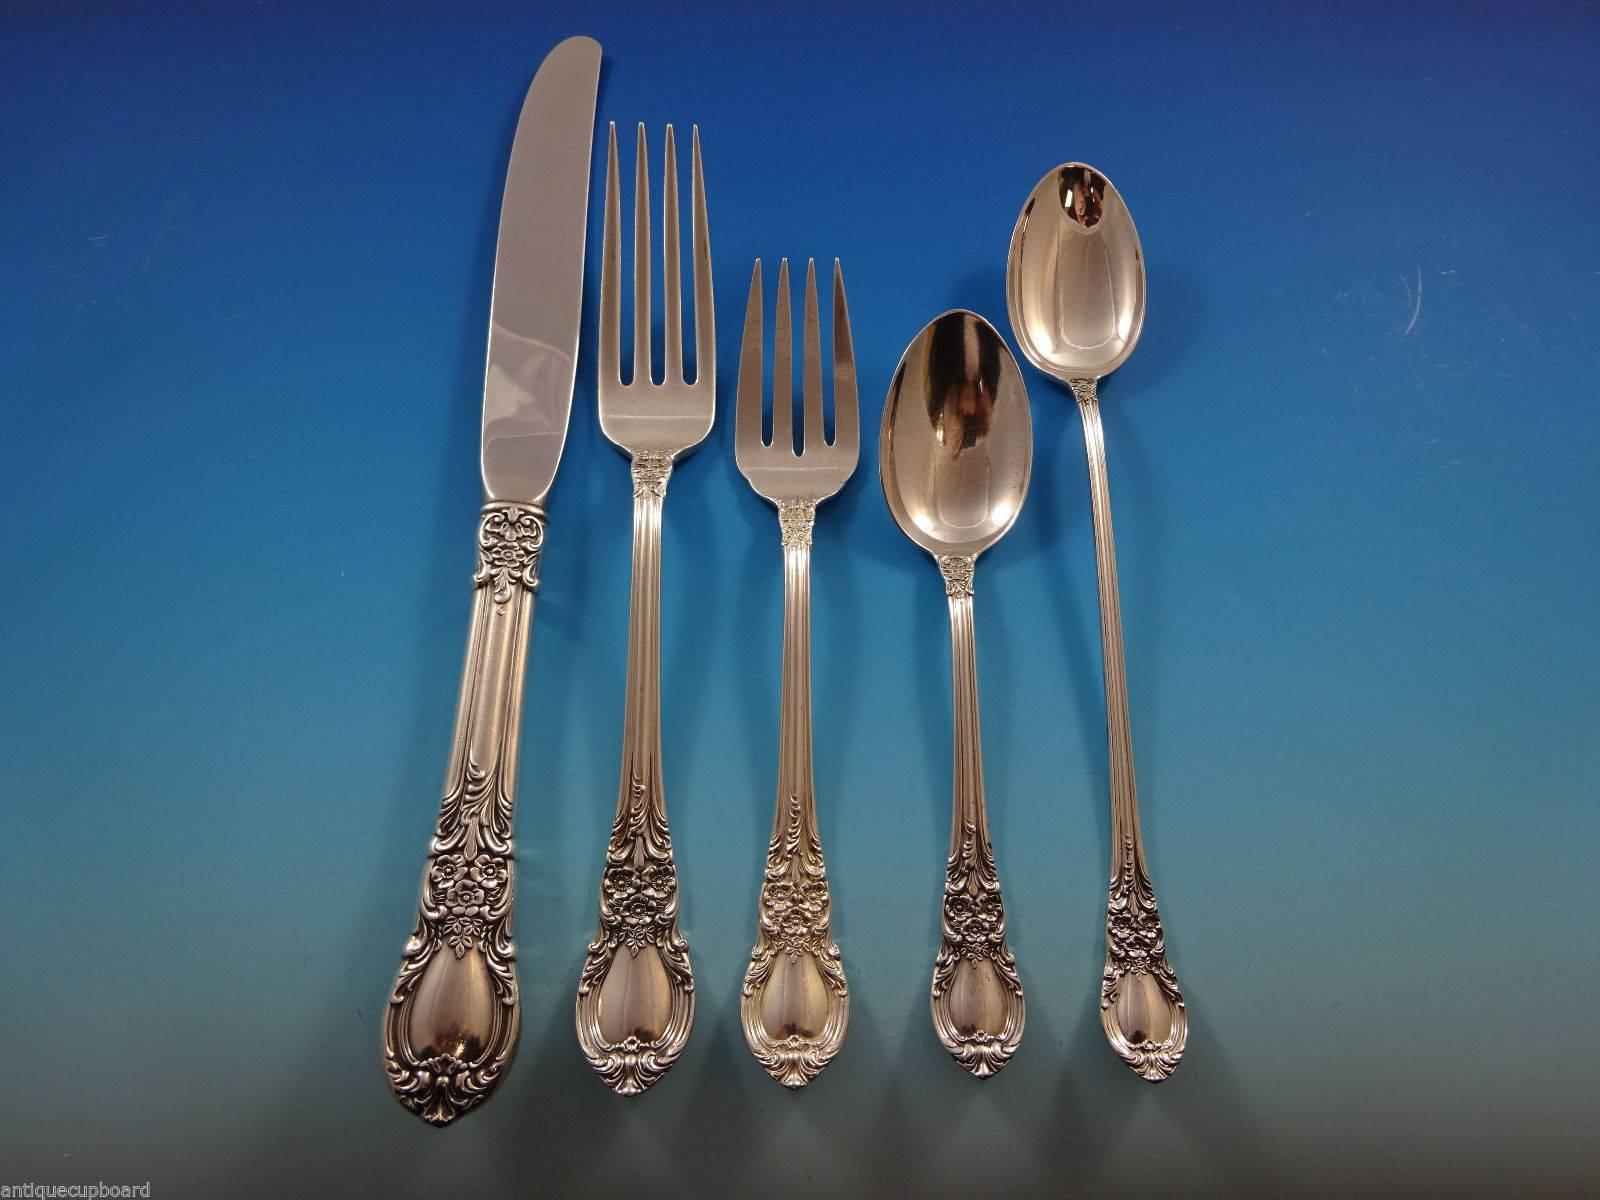 American Victorian by Lunt sterling silver dinner size flatware set of 40 pieces. This set includes:

Eight dinner size knives, 9 5/8